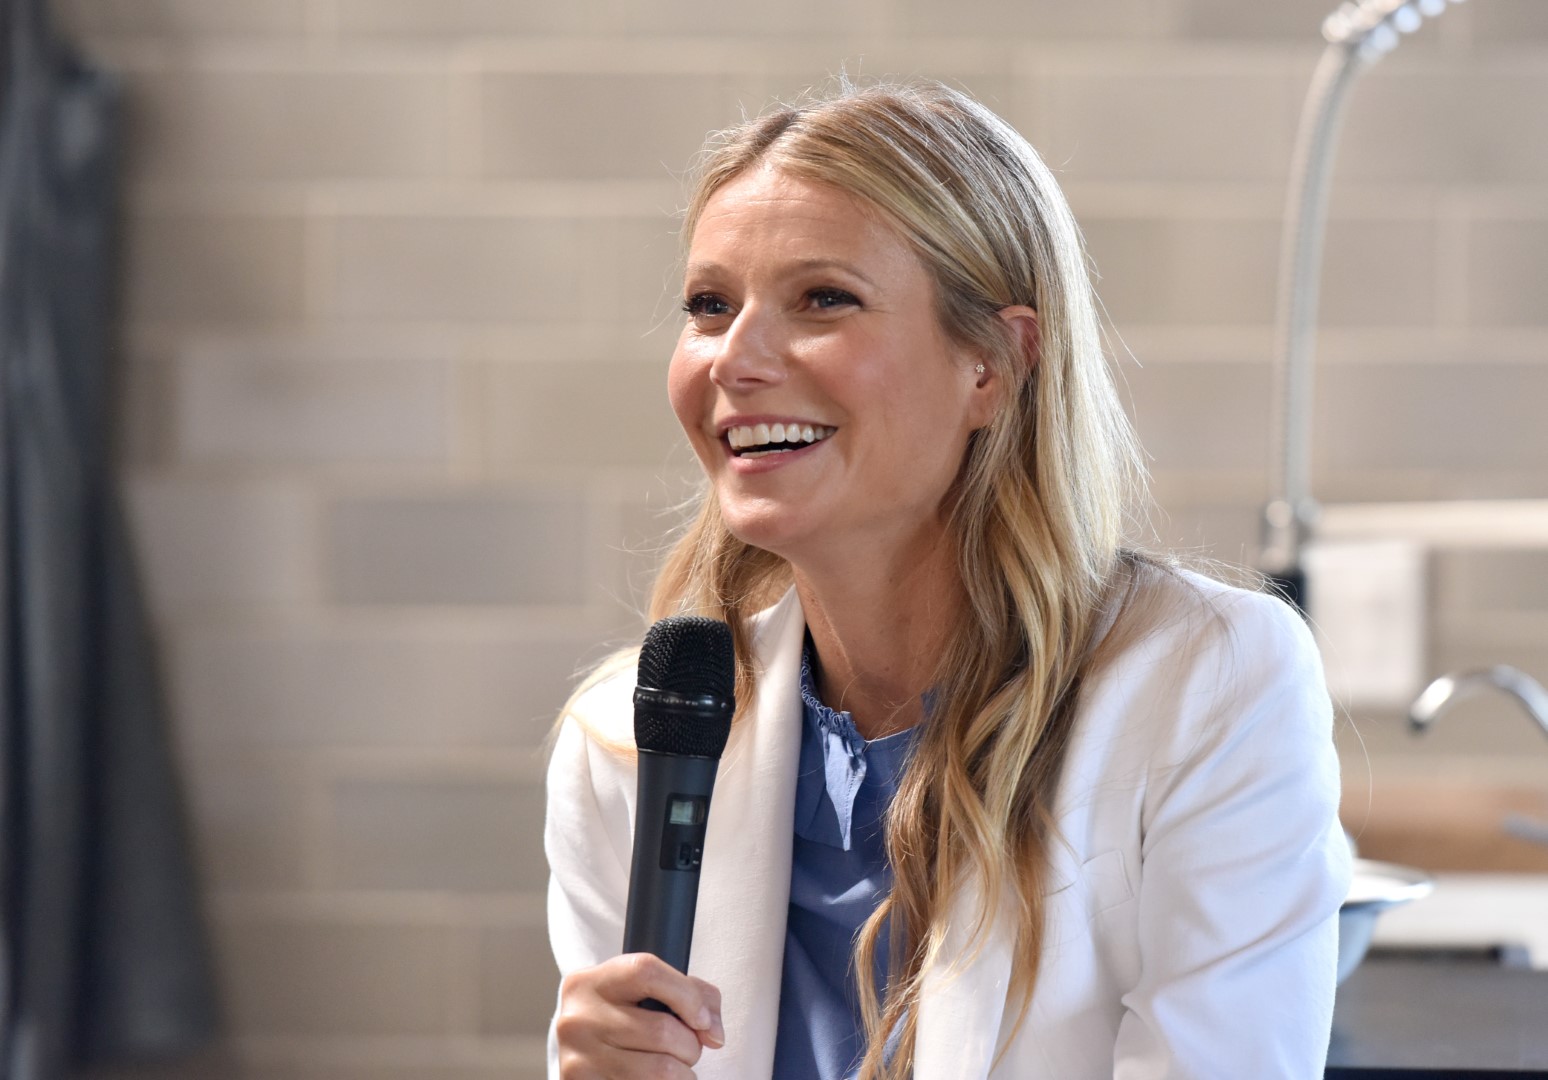 SANTA MONICA, CA - MAY 16: Gwyneth Paltrow speaks at Fast Company with Gwyneth Paltrow and Goop at FC/LA: A Meeting Of The Most Creative Minds on May 16, 2017 in Santa Monica, California. (Photo by Vivien Killilea/Getty Images for Fast Company)